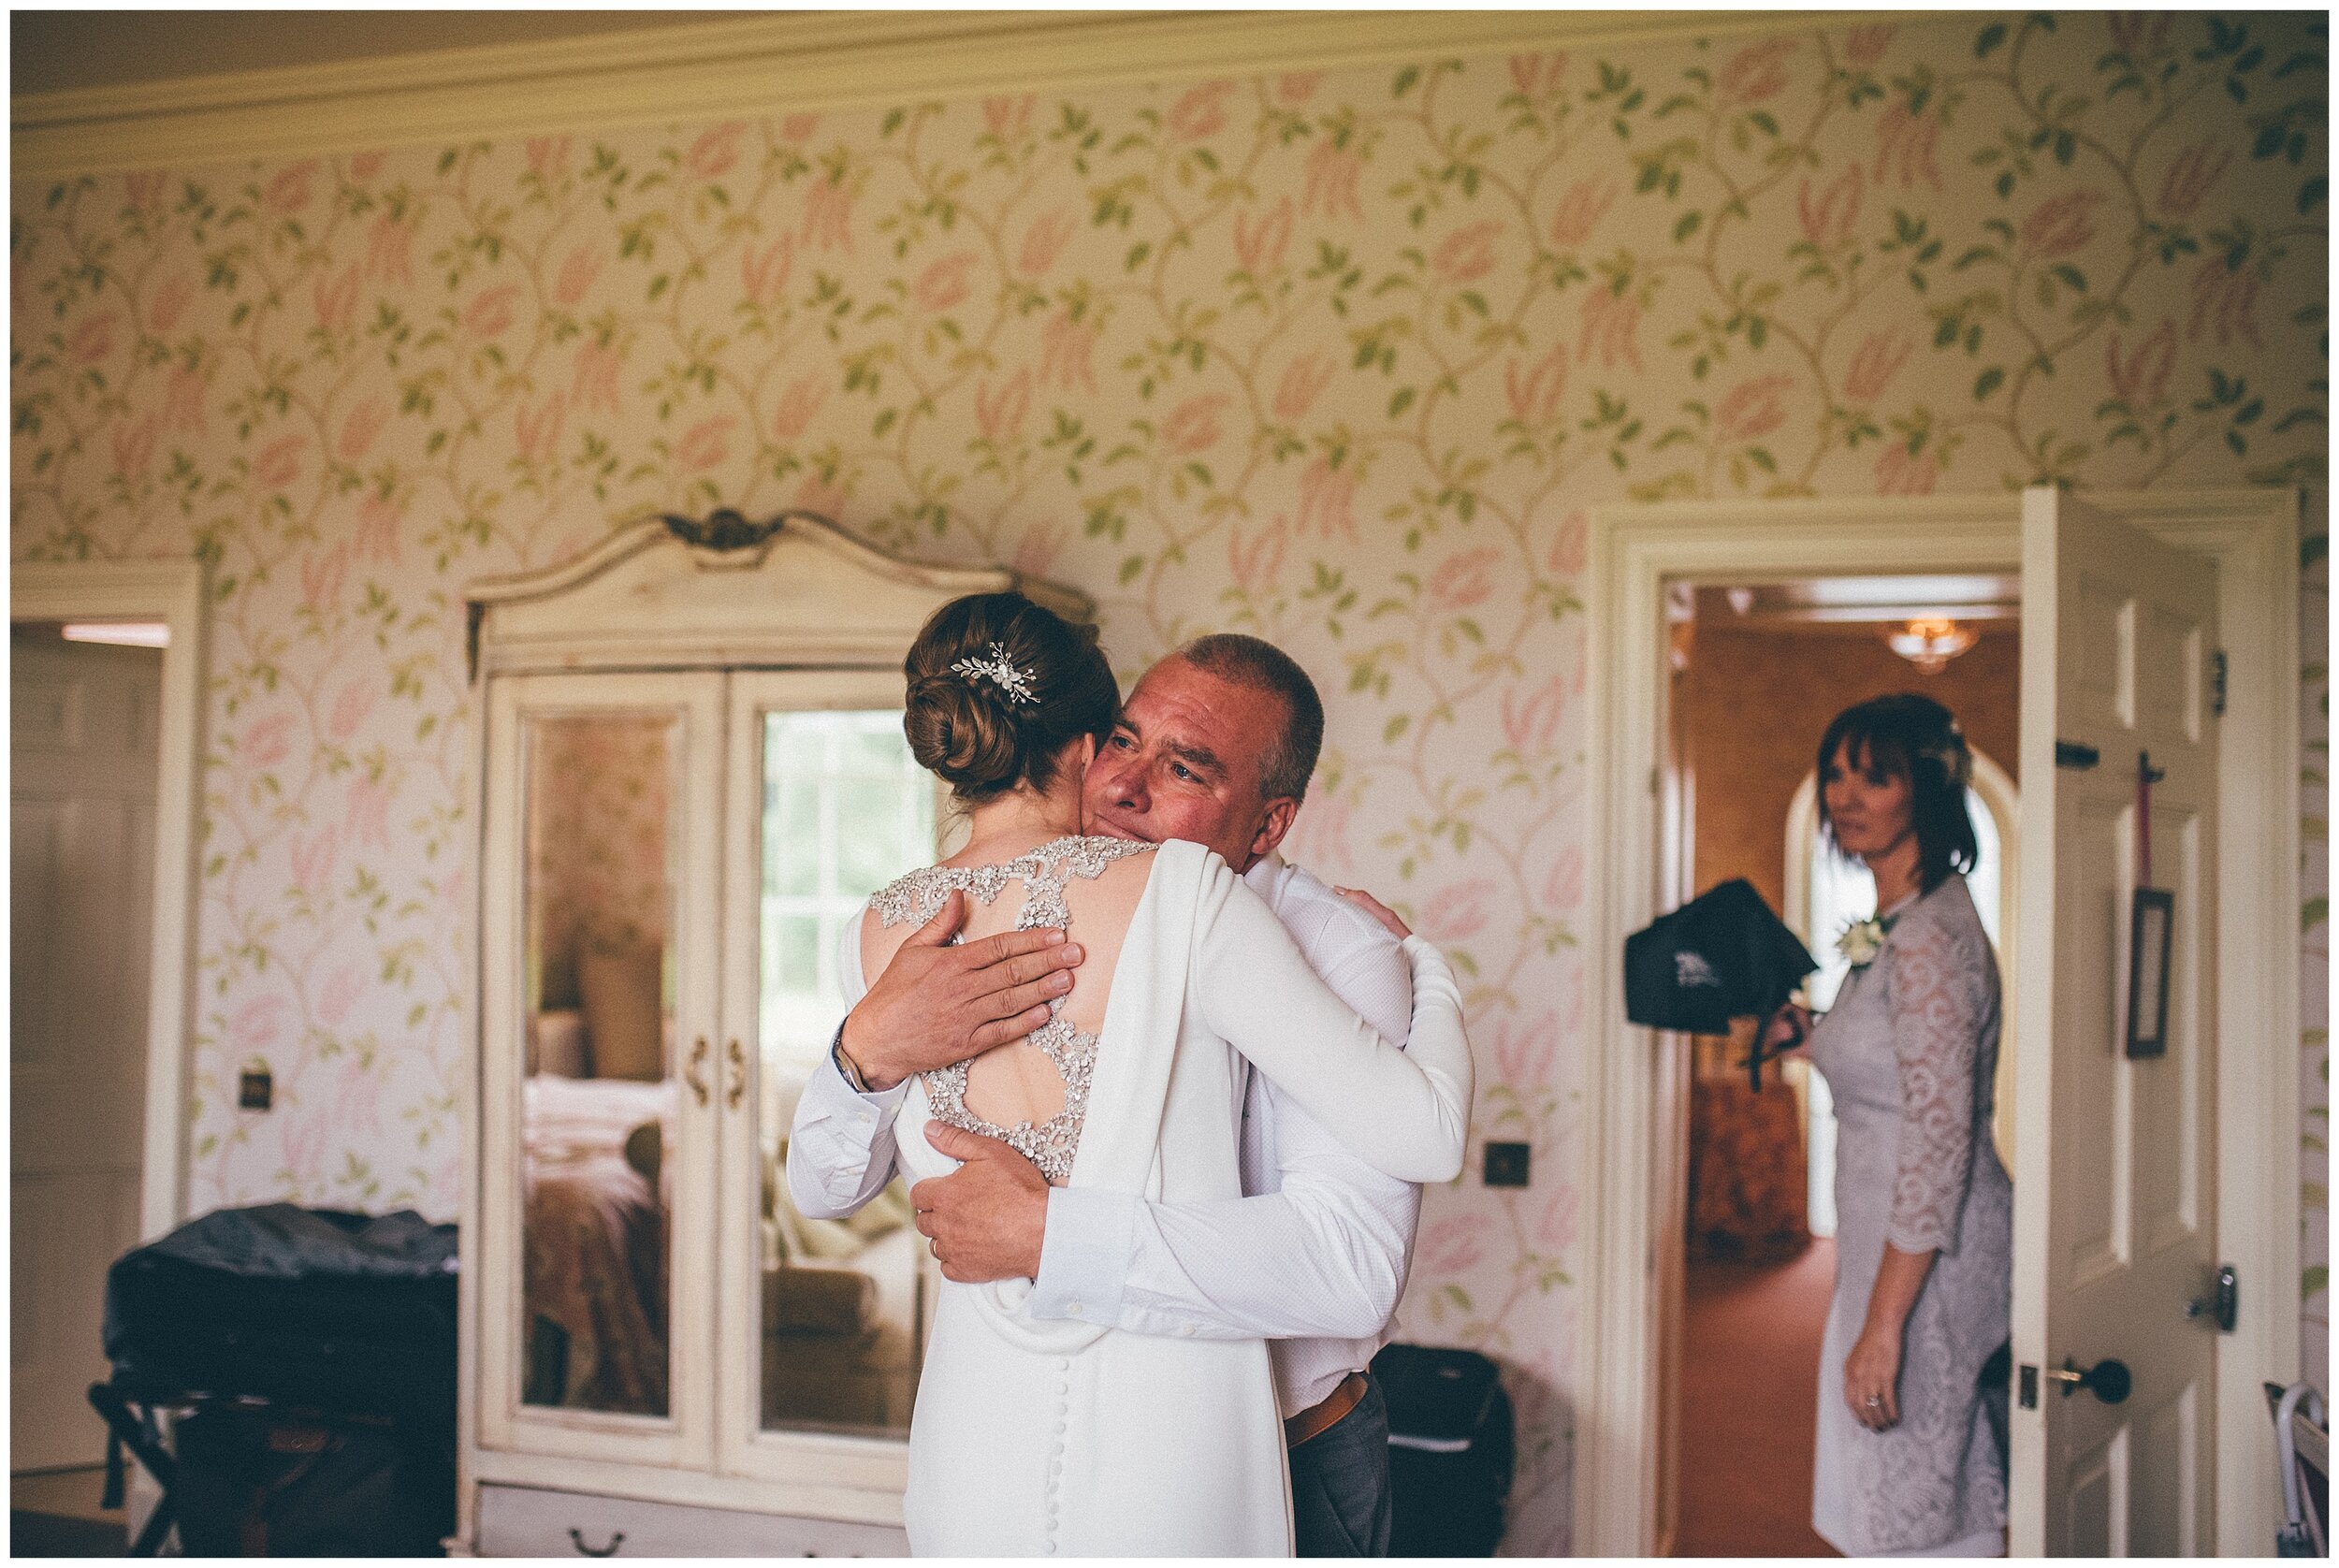 Bride's dad hugs her as he sees her as a bride for the first time.